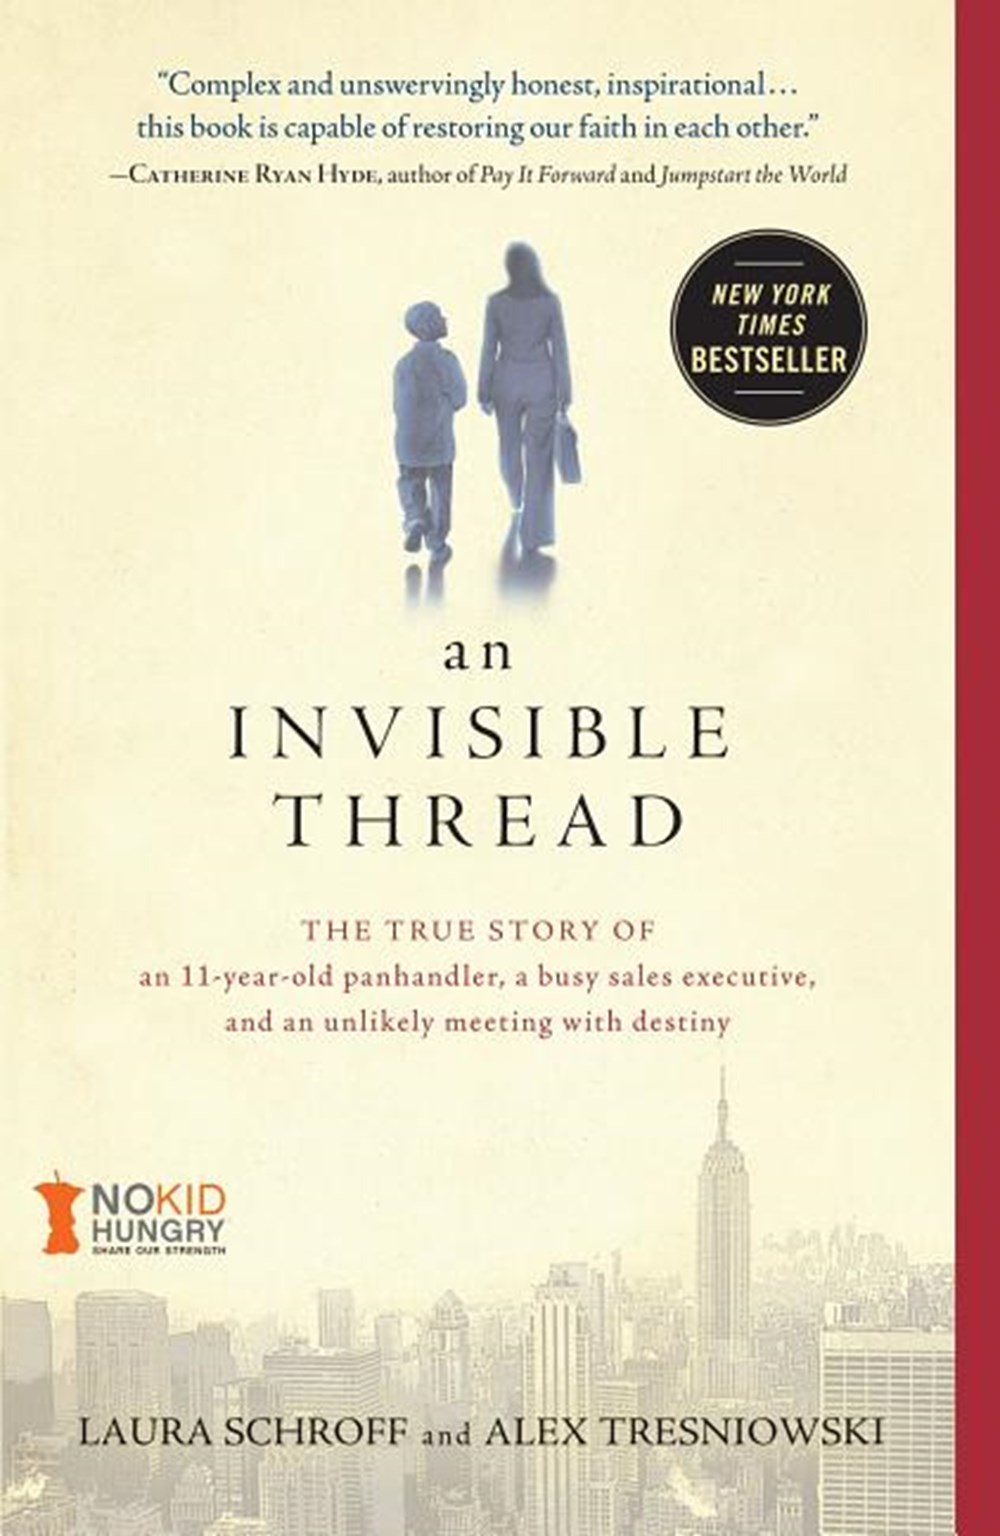 Invisible Thread The True Story of an 11-Year-Old Panhandler, a Busy Sales Executive, and an Unlikel